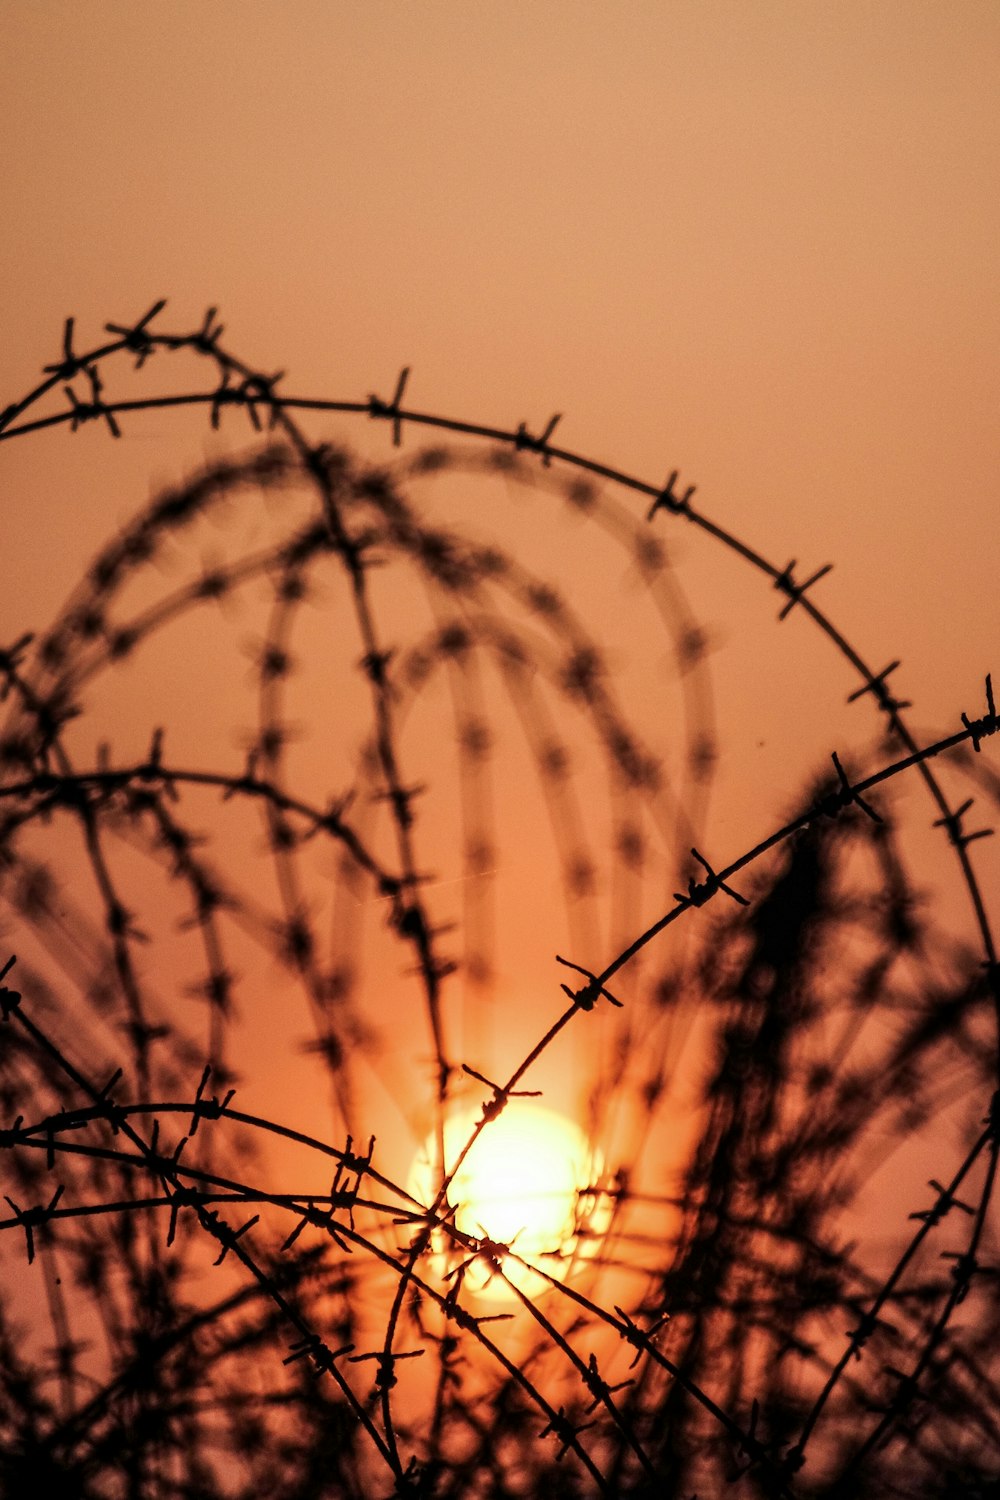 the sun is setting behind a barbed wire fence